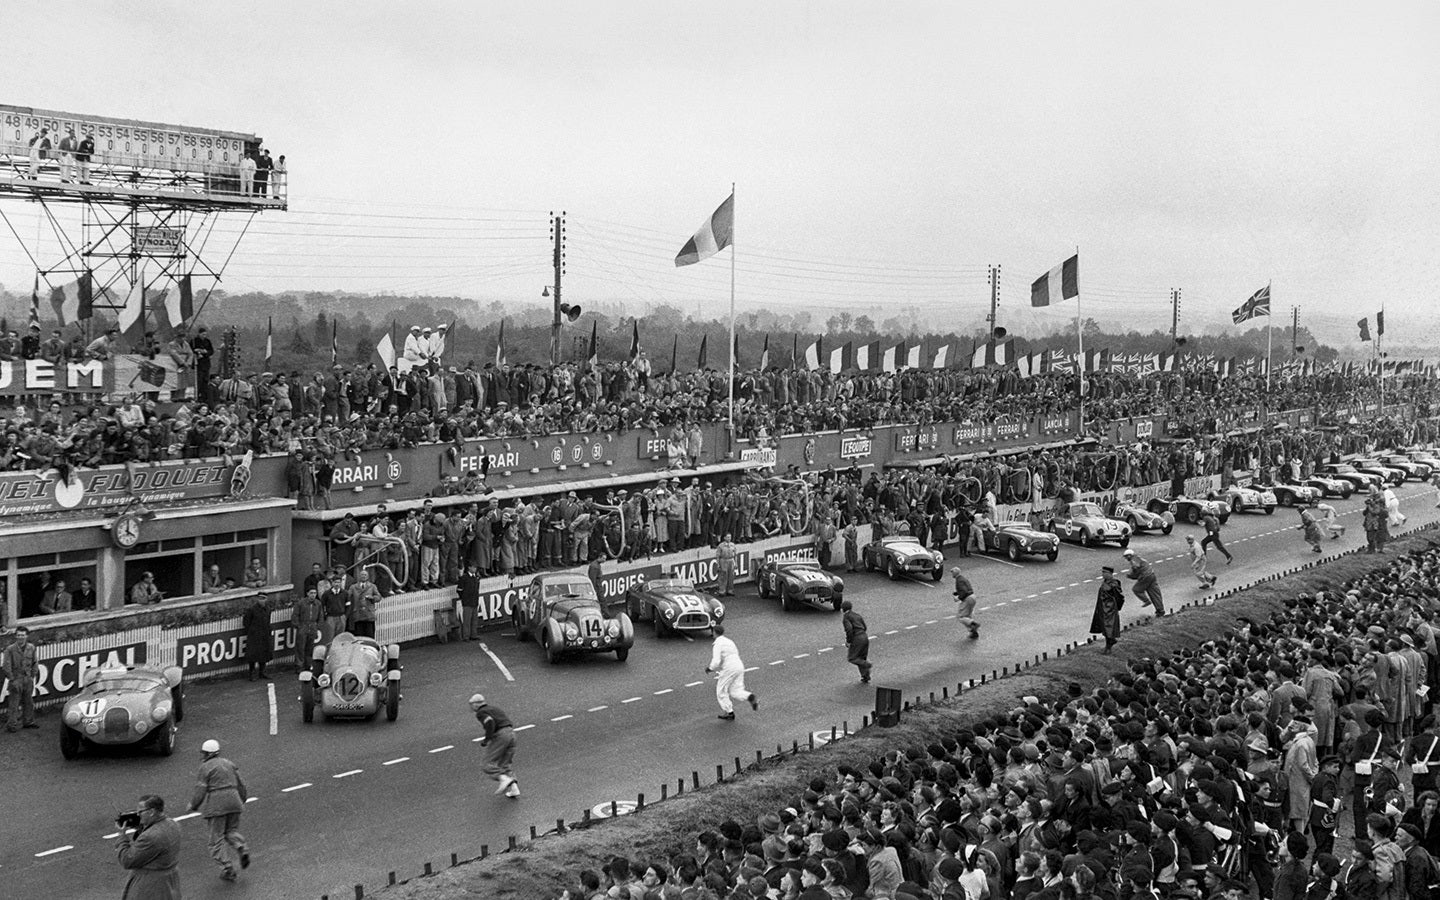 Vintage Photo of Racers at the French Motorsport Event, Le Mans